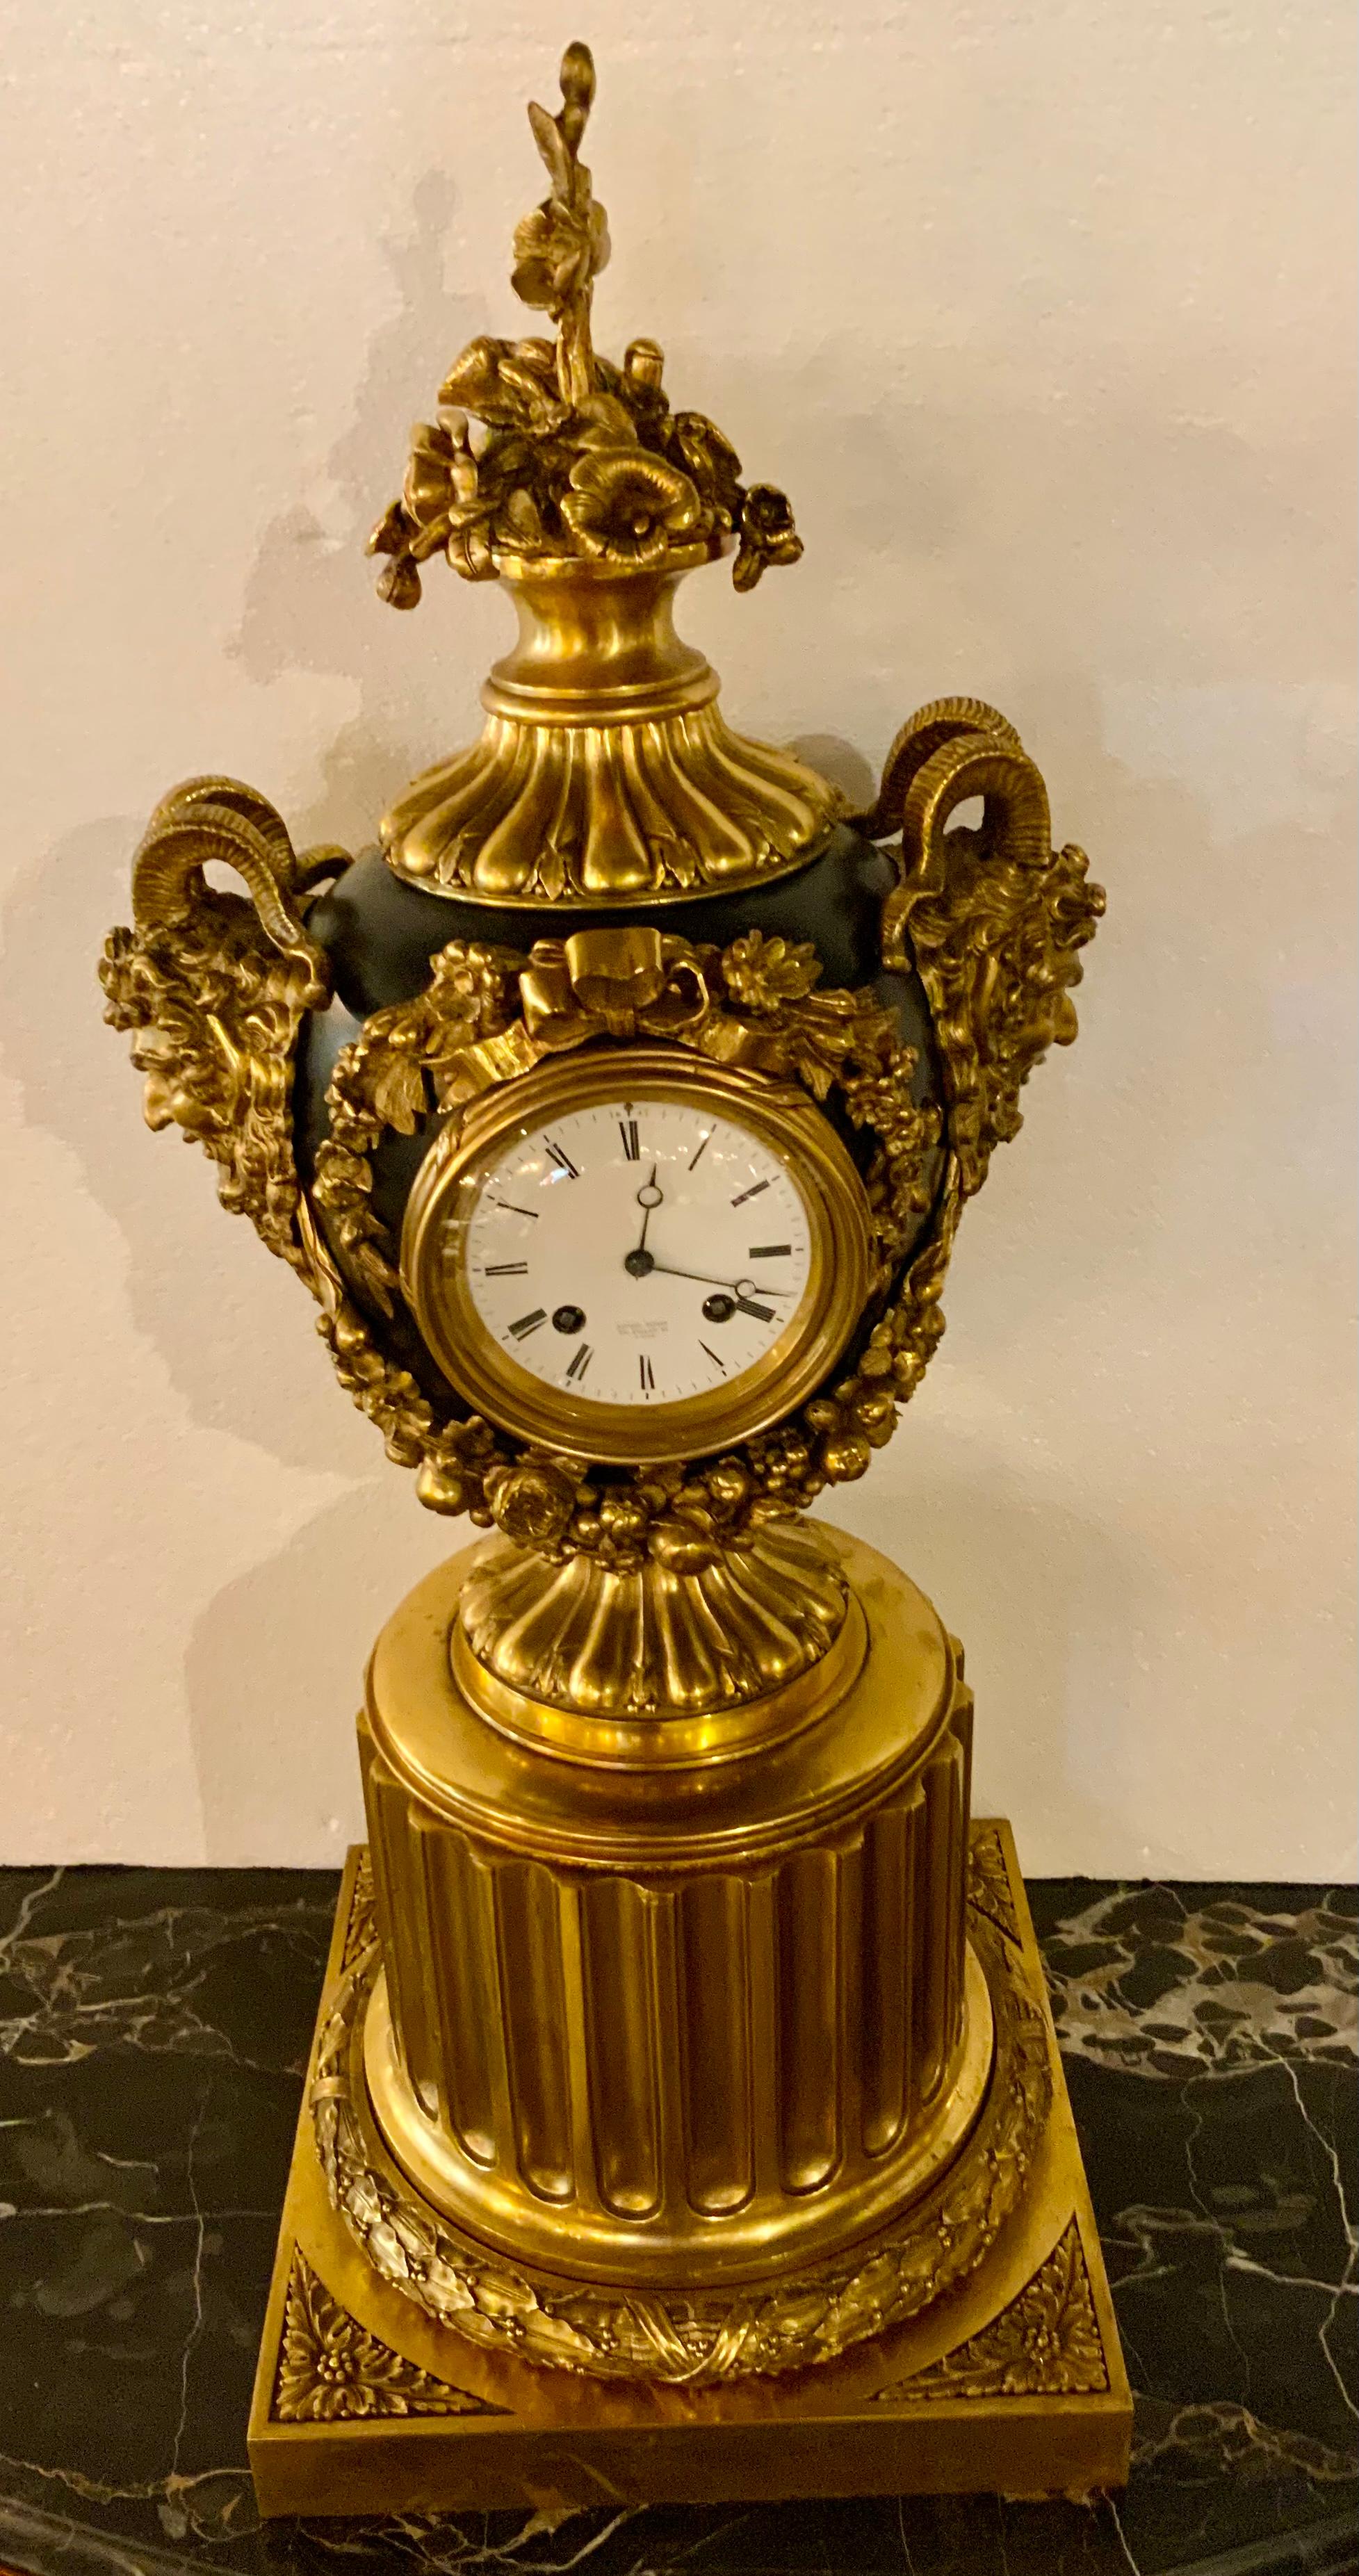 This clock is very dramatic in appearance with bright gold gilt ornamentation 
With designs in floral and foliate elements. Gilt masques decorate the
The sides. The clock is in good working condition and has the original 
Key and pendulum. It